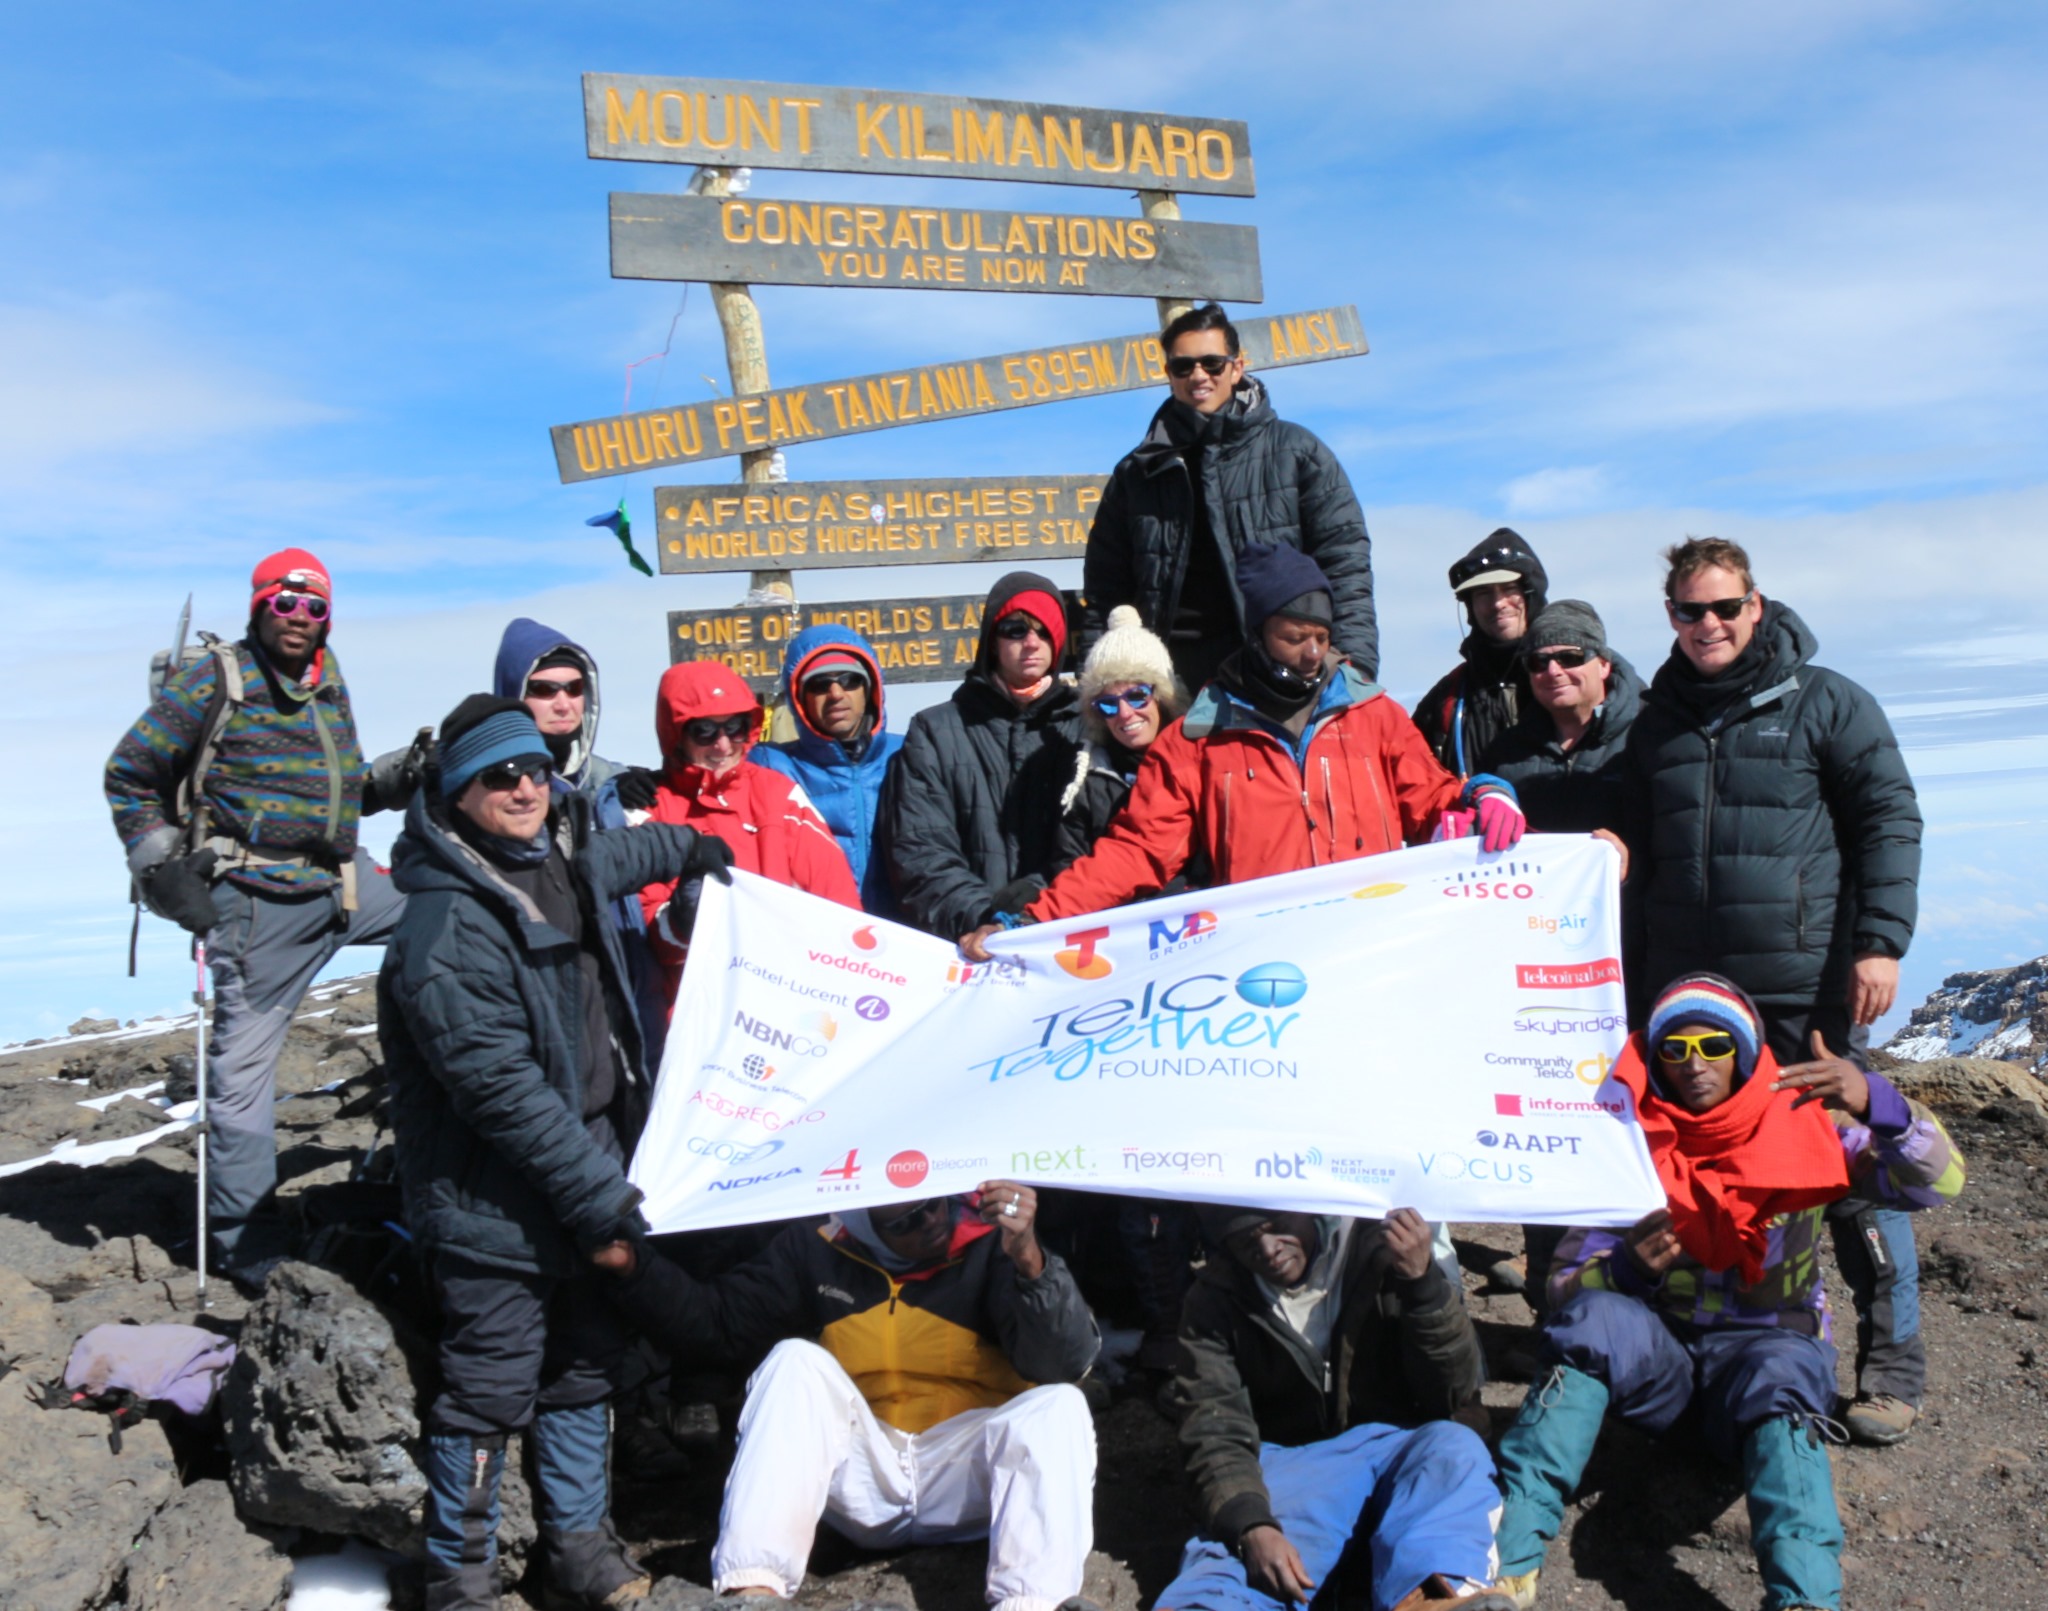 As crazy as it sounds, we set off again in March 2015 to fundraise for the <a href='http://www.telcotogether.org.au' target='blank'><b>Telco Together Foundation</b></a> by climbing Mount Kilimanjaro - this time the <a href='/kilimanjaro-2015-the-lemosho-route/'>Lemosho Route</a>. All funds raised go directly to the Foundation's worthy recipients - <b>Second Bite</b>, <b>Inspire</b>, <b>Red Dust Role Models</b> & <b>Sports Without Borders</b>.